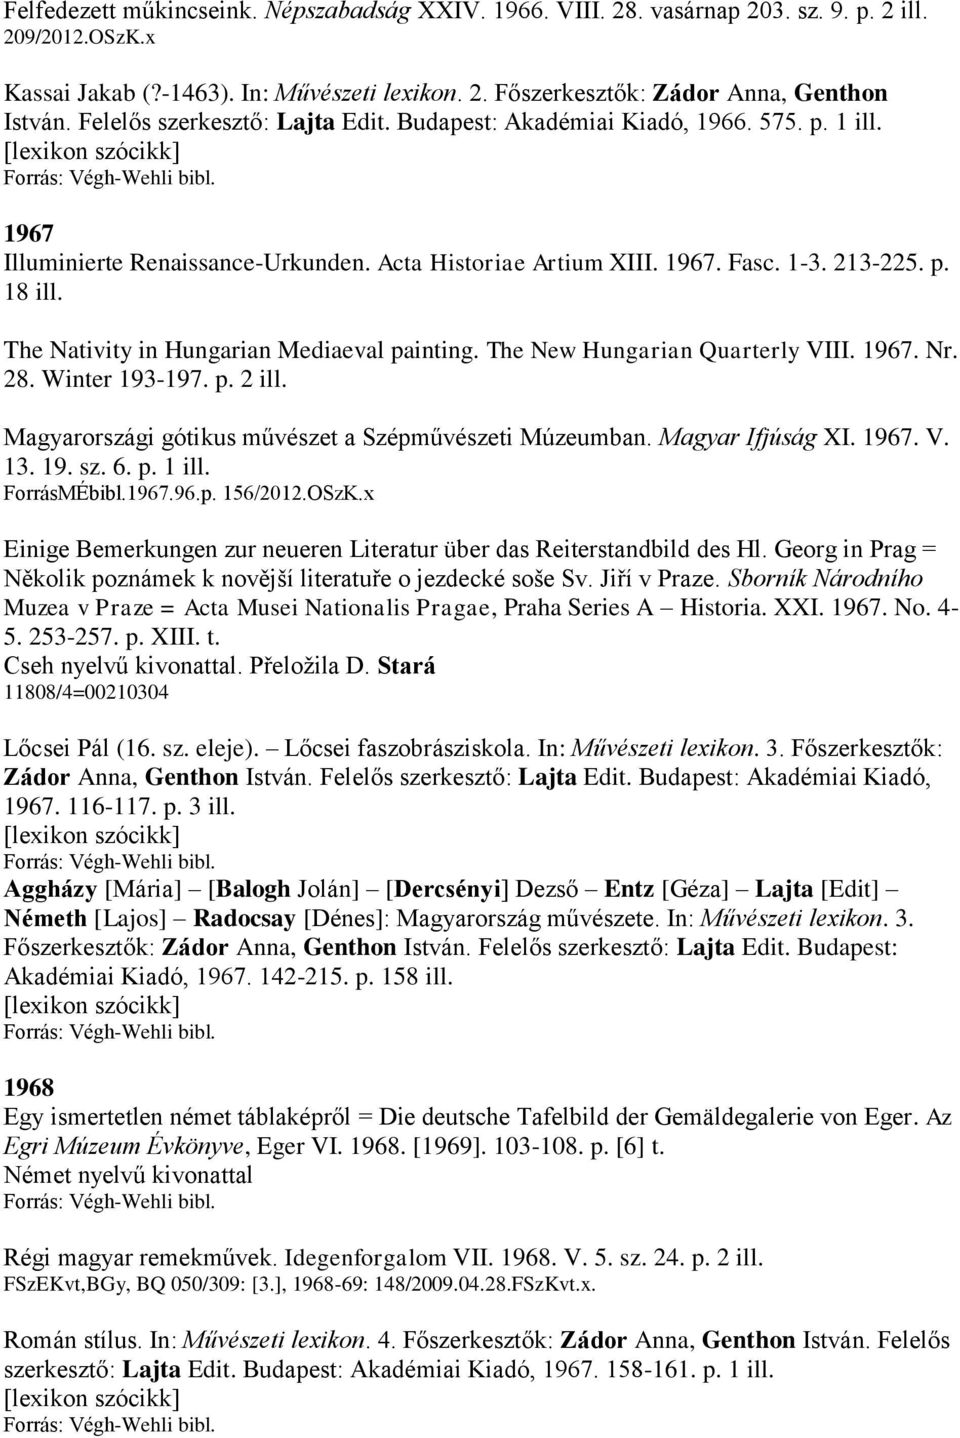 1-3. 213-225. p. 18 ill. The Nativity in Hungarian Mediaeval painting. The New Hungarian Quarterly VIII. 1967. Nr. 28. Winter 193-197. p. 2 ill.